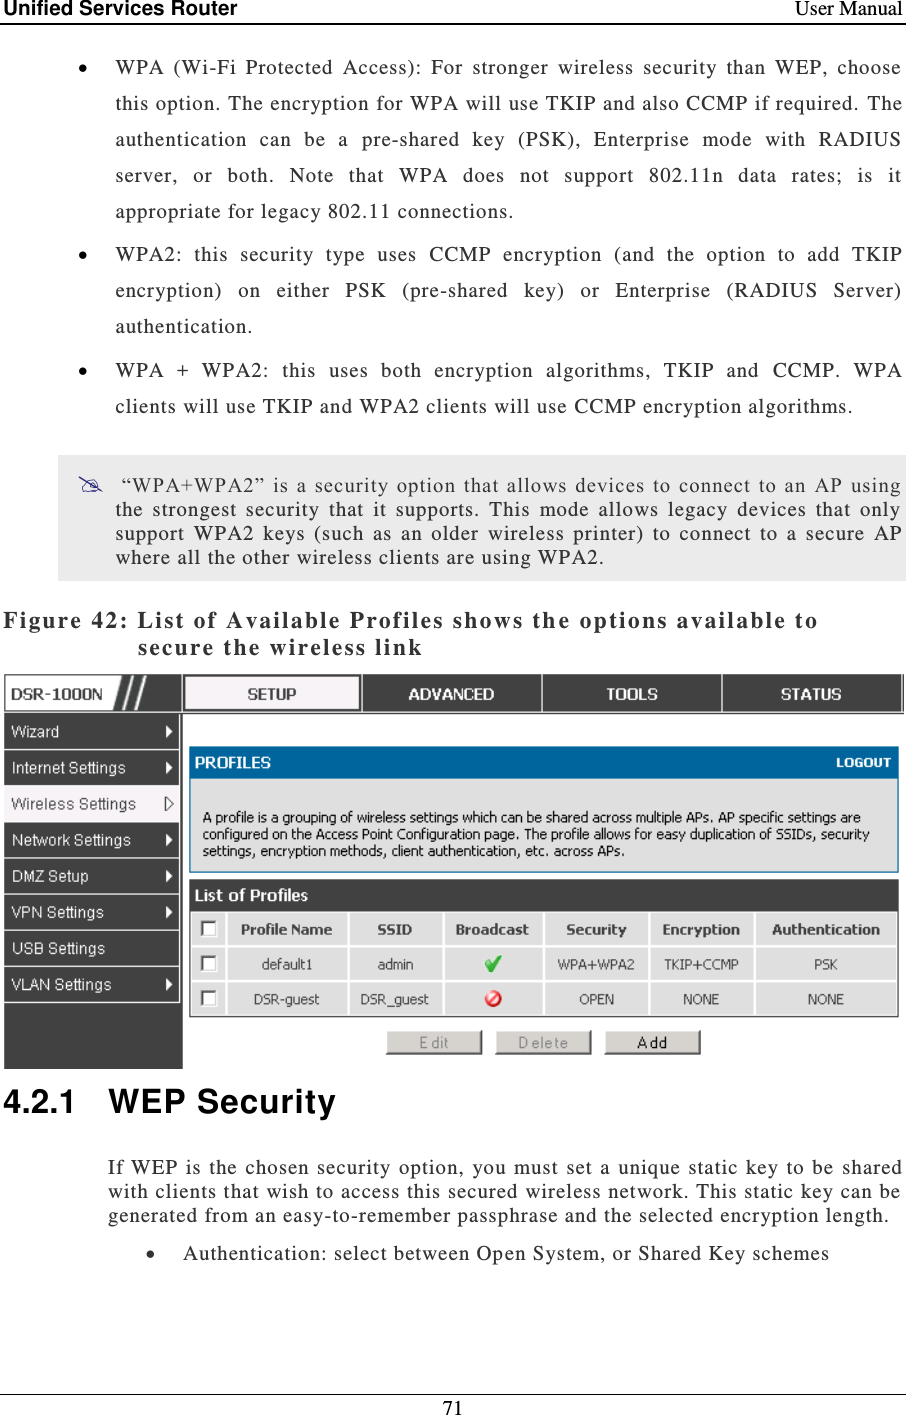 Unified Services Router    User Manual 71   WPA  (Wi-Fi  Protected  Access):  For  stronger  wireless  security  than  WEP,  choose this option. The encryption for WPA will use TKIP and also CCMP if required.  The authentication  can  be  a  pre-shared  key  (PSK),  Enterprise  mode  with  RADIUS server,  or  both.  Note  that  WPA  does  not  support  802.11n  data  rates;  is  it appropriate for legacy 802.11 connections.   WPA2:  this  security  type  uses  CCMP  encryption  (and  the  option  to  add  TKIP encryption)  on  either  PSK  (pre-shared  key)  or  Enterprise  (RADIUS  Server) authentication.  WPA  +  WPA2:  this  uses  both  encryption  algorithms,  TKIP  and  CCMP.  WPA clients will use TKIP and WPA2 clients will use CCMP encryption algorithms.   “WPA+WPA2”  is a  security  option  that  allows  devices  to  connect  to  an  AP  using the  strongest  security  that  it  supports.  This  mode  allows  legacy  devices  that  only support  WPA2  keys  (such  as  an  older  wireless  printer)  to  connect  to  a  secure  AP where all the other wireless clients are using WPA2.   Figure 42: Li st of Available Prof iles show s th e  options available t o secure the wireless li nk   4.2.1  WEP Security If WEP  is  the  chosen security  option, you  must  set  a  unique static  key  to be  shared with clients that wish to access this secured wireless network. This static key can be generated from an easy-to-remember passphrase and the selected encryption length.   Authentication: select between Op en System, or Shared Key schemes 